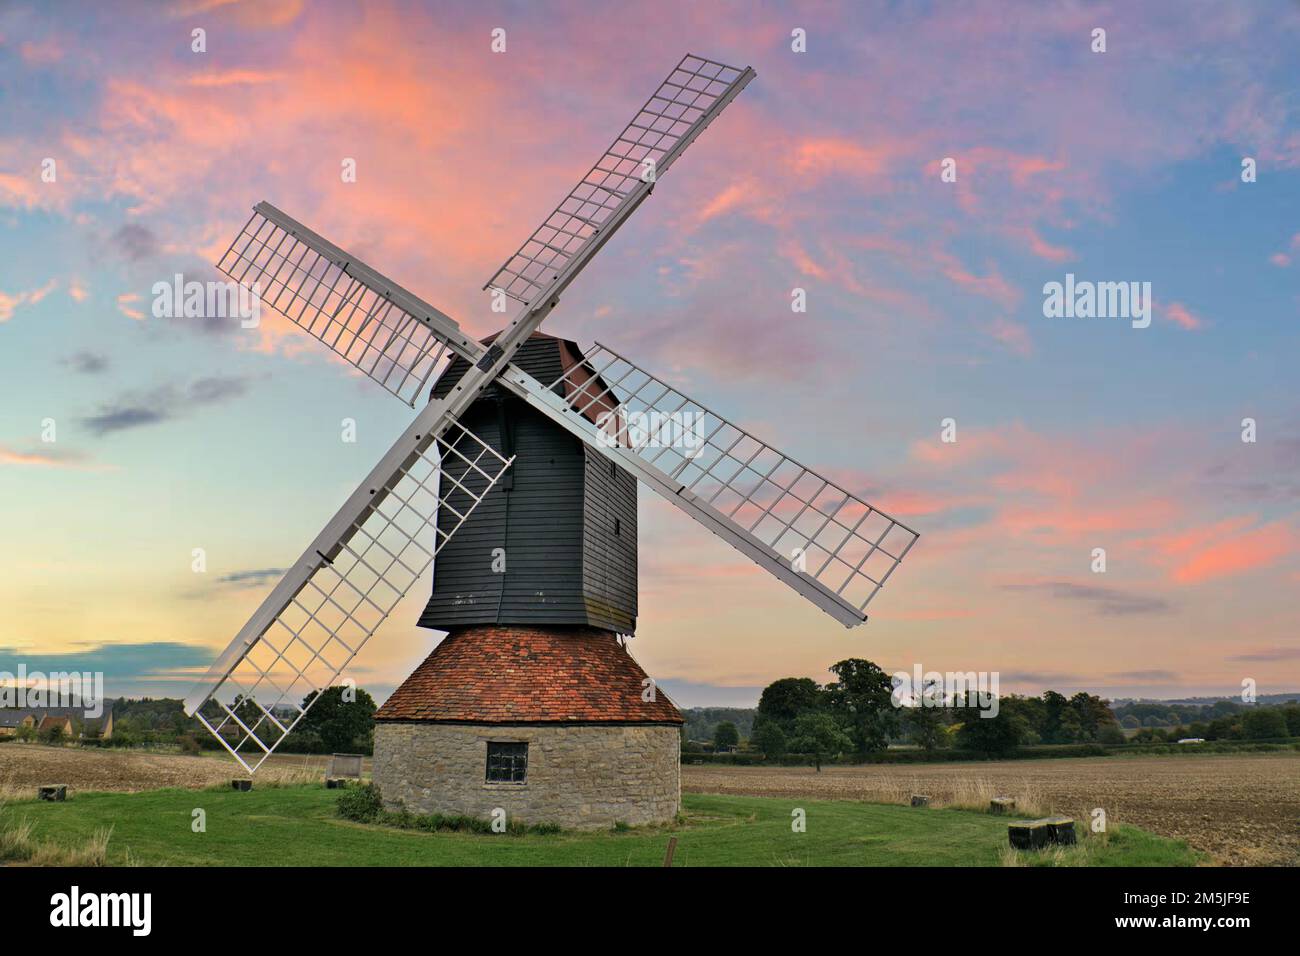 18th century windmill in a field on farmland in the village of Stevington at sunset, Bedfordshire, England, UK Stock Photo